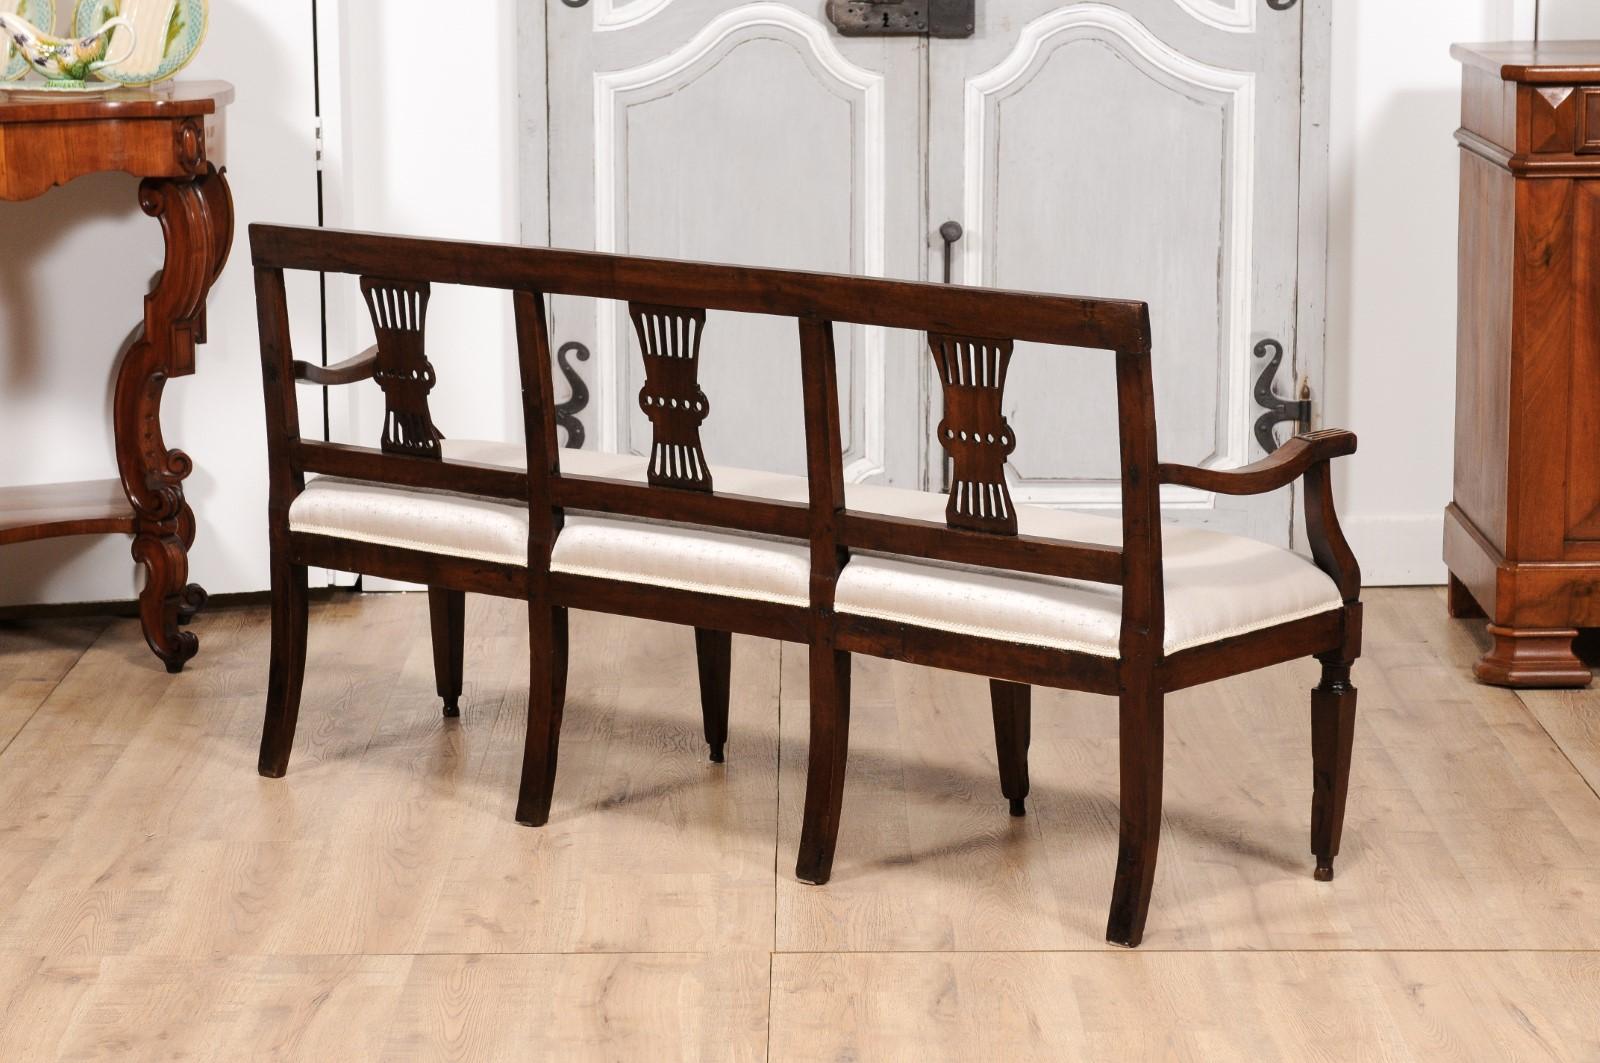 Italian 19th Century Walnut Three-Seater Bench with Carved Splats and Upholstery For Sale 3